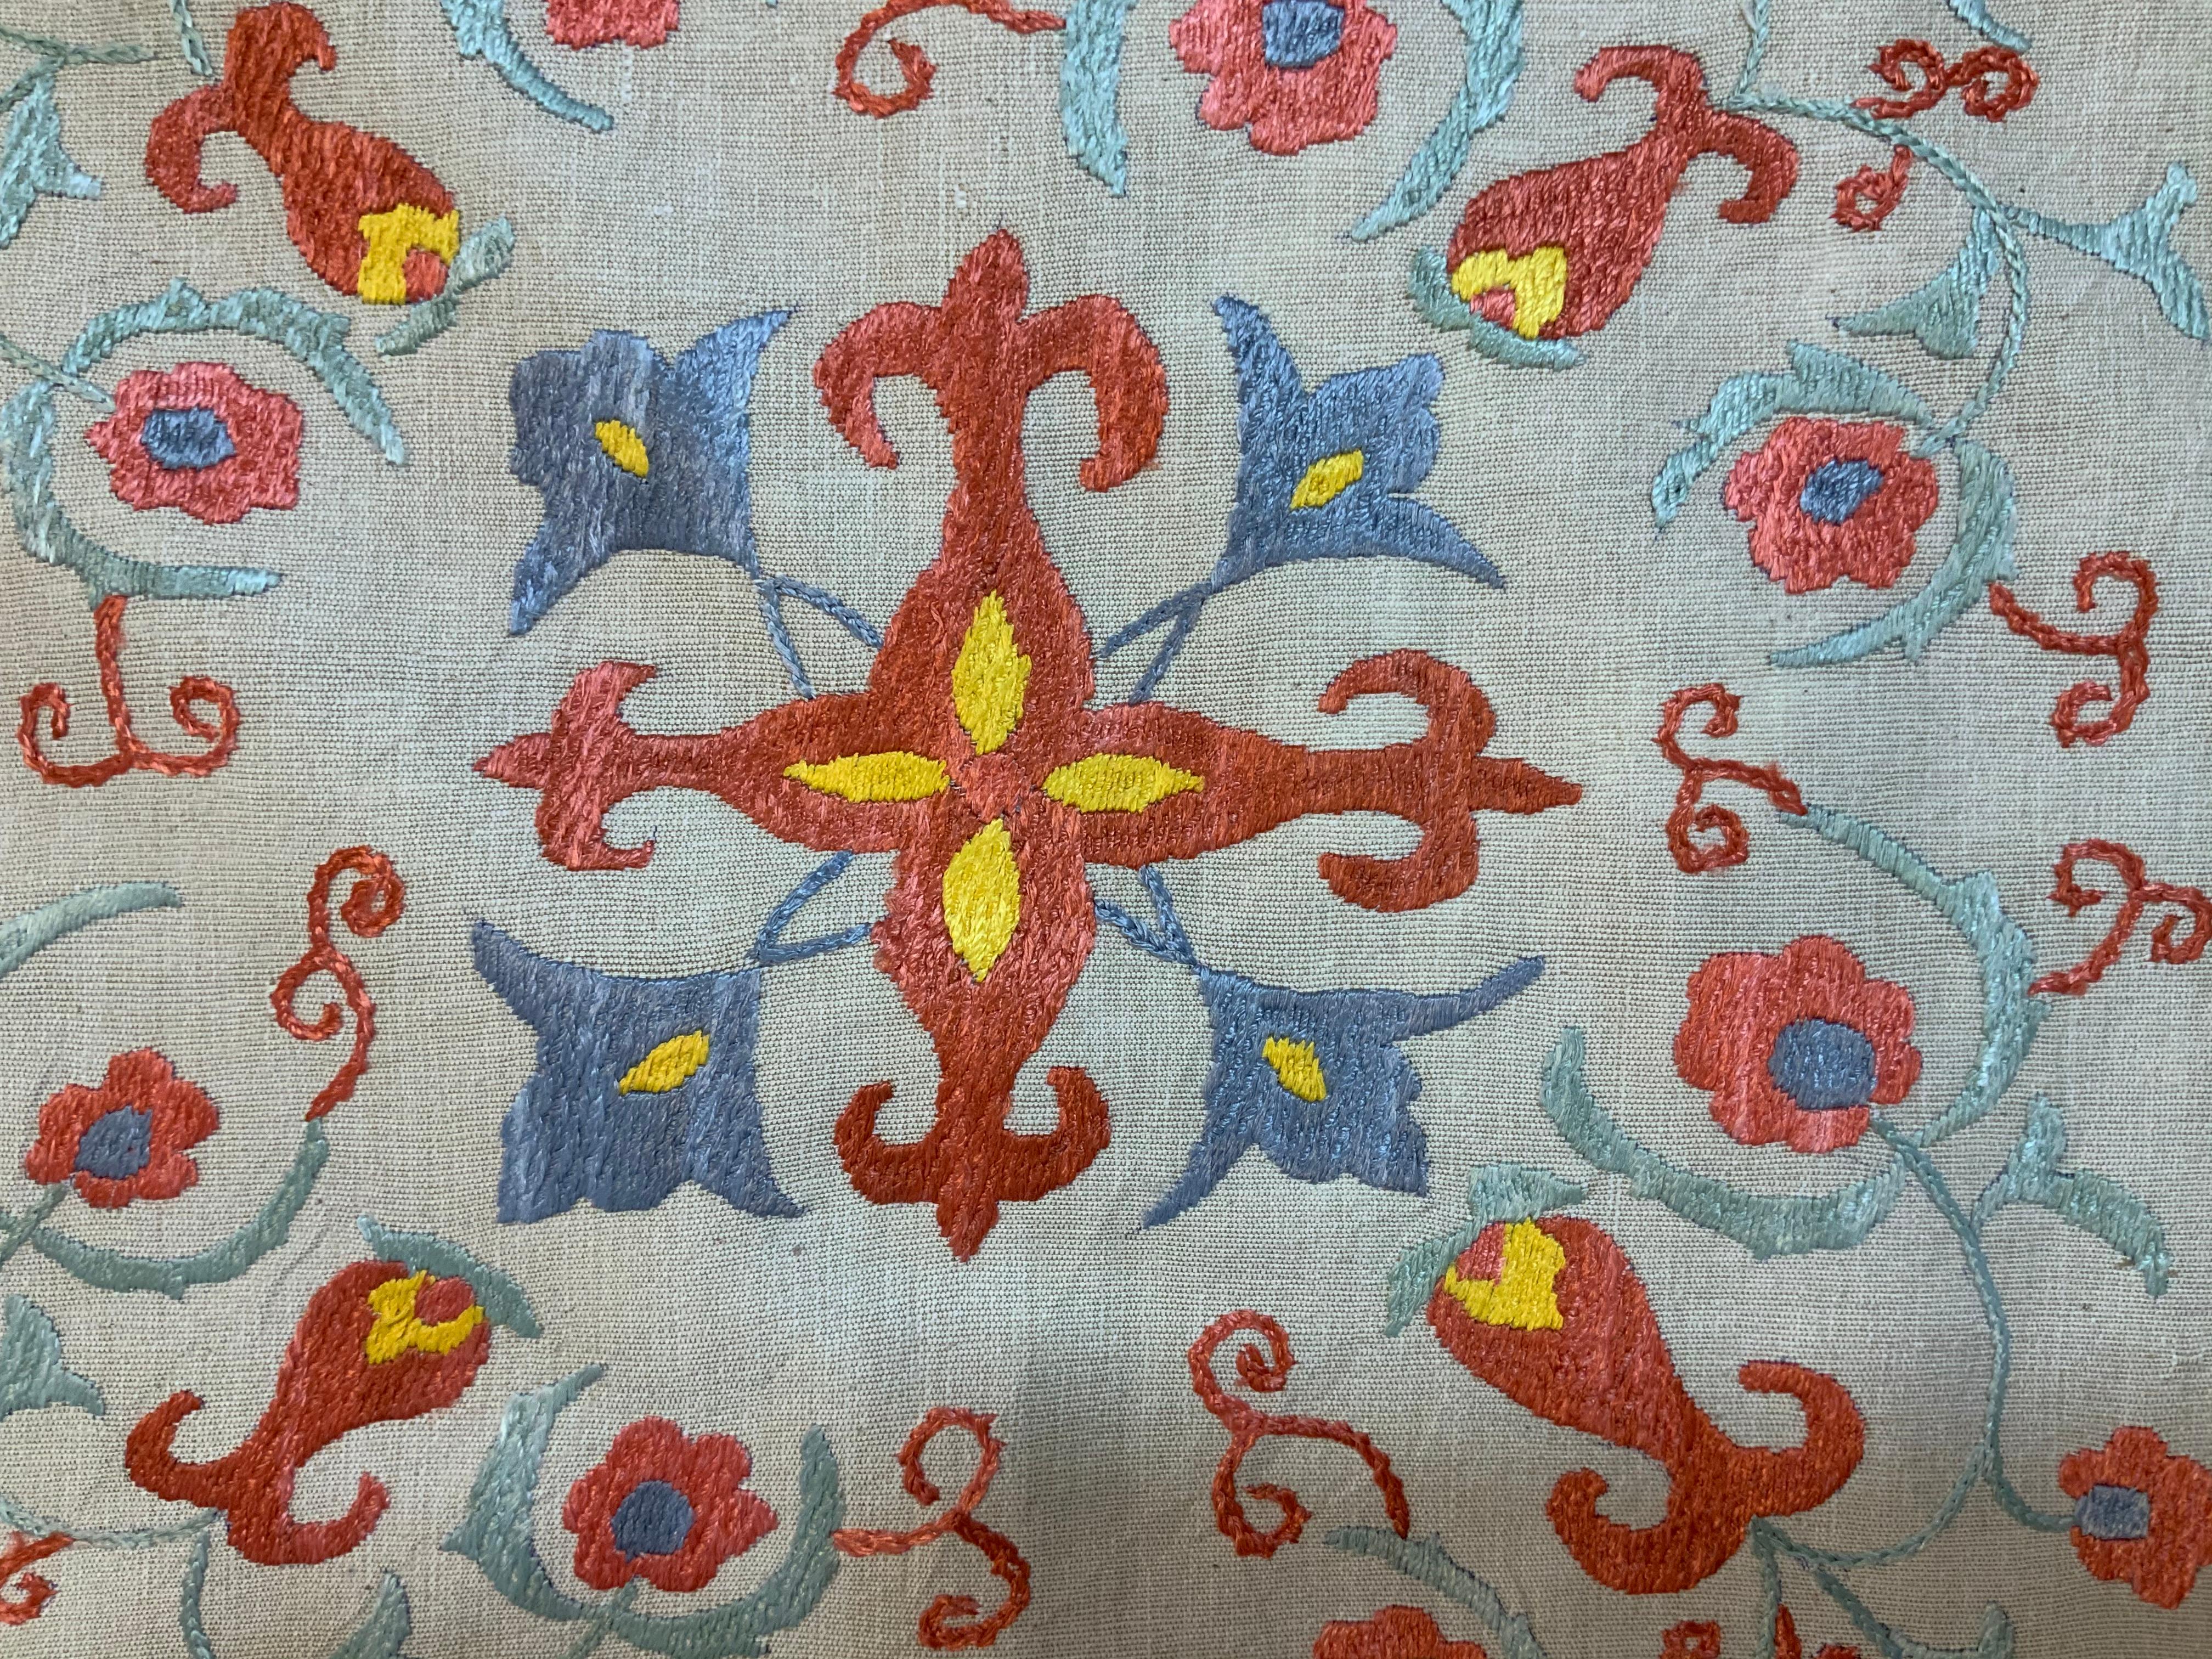 Hand Embroidered Suzani Pillow In Good Condition For Sale In Delray Beach, FL